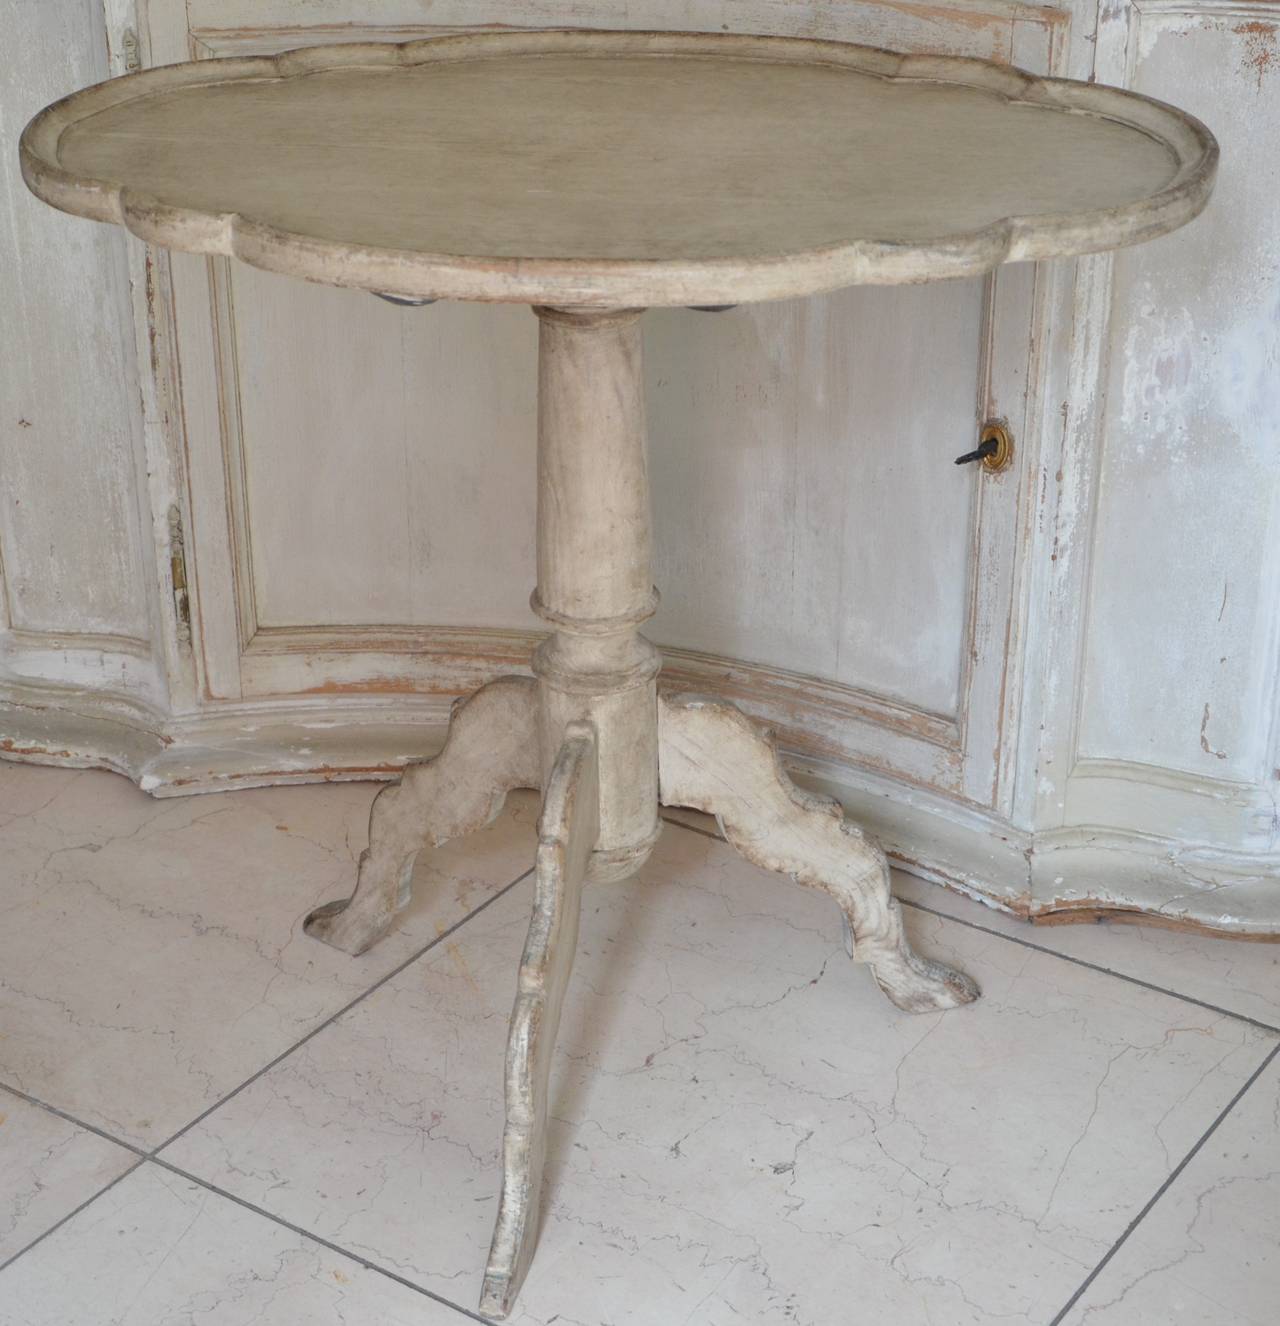 Small, charming pedestal table, Sweden, circa 1810, with scalloped oval top in pale worn gray patina.